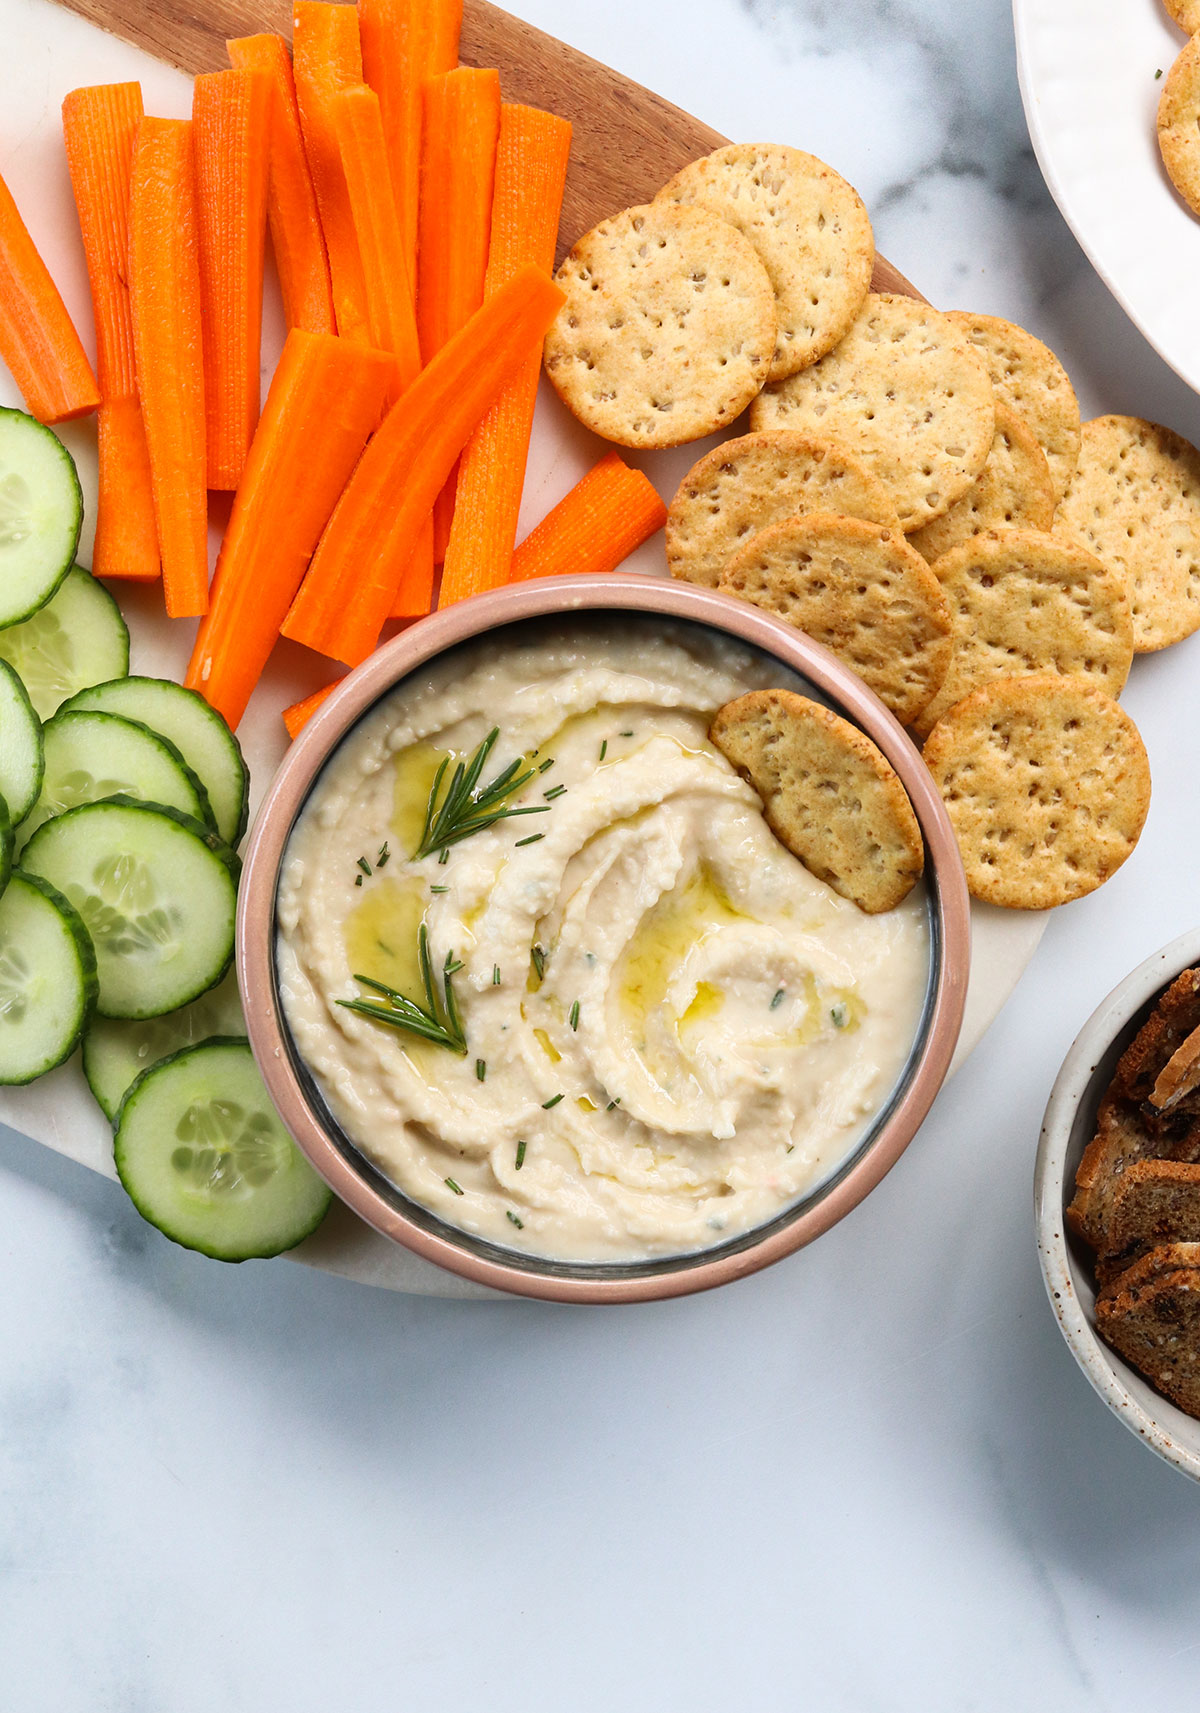 white bean dip topped with rosemary and served with crackers and sliced veggies.